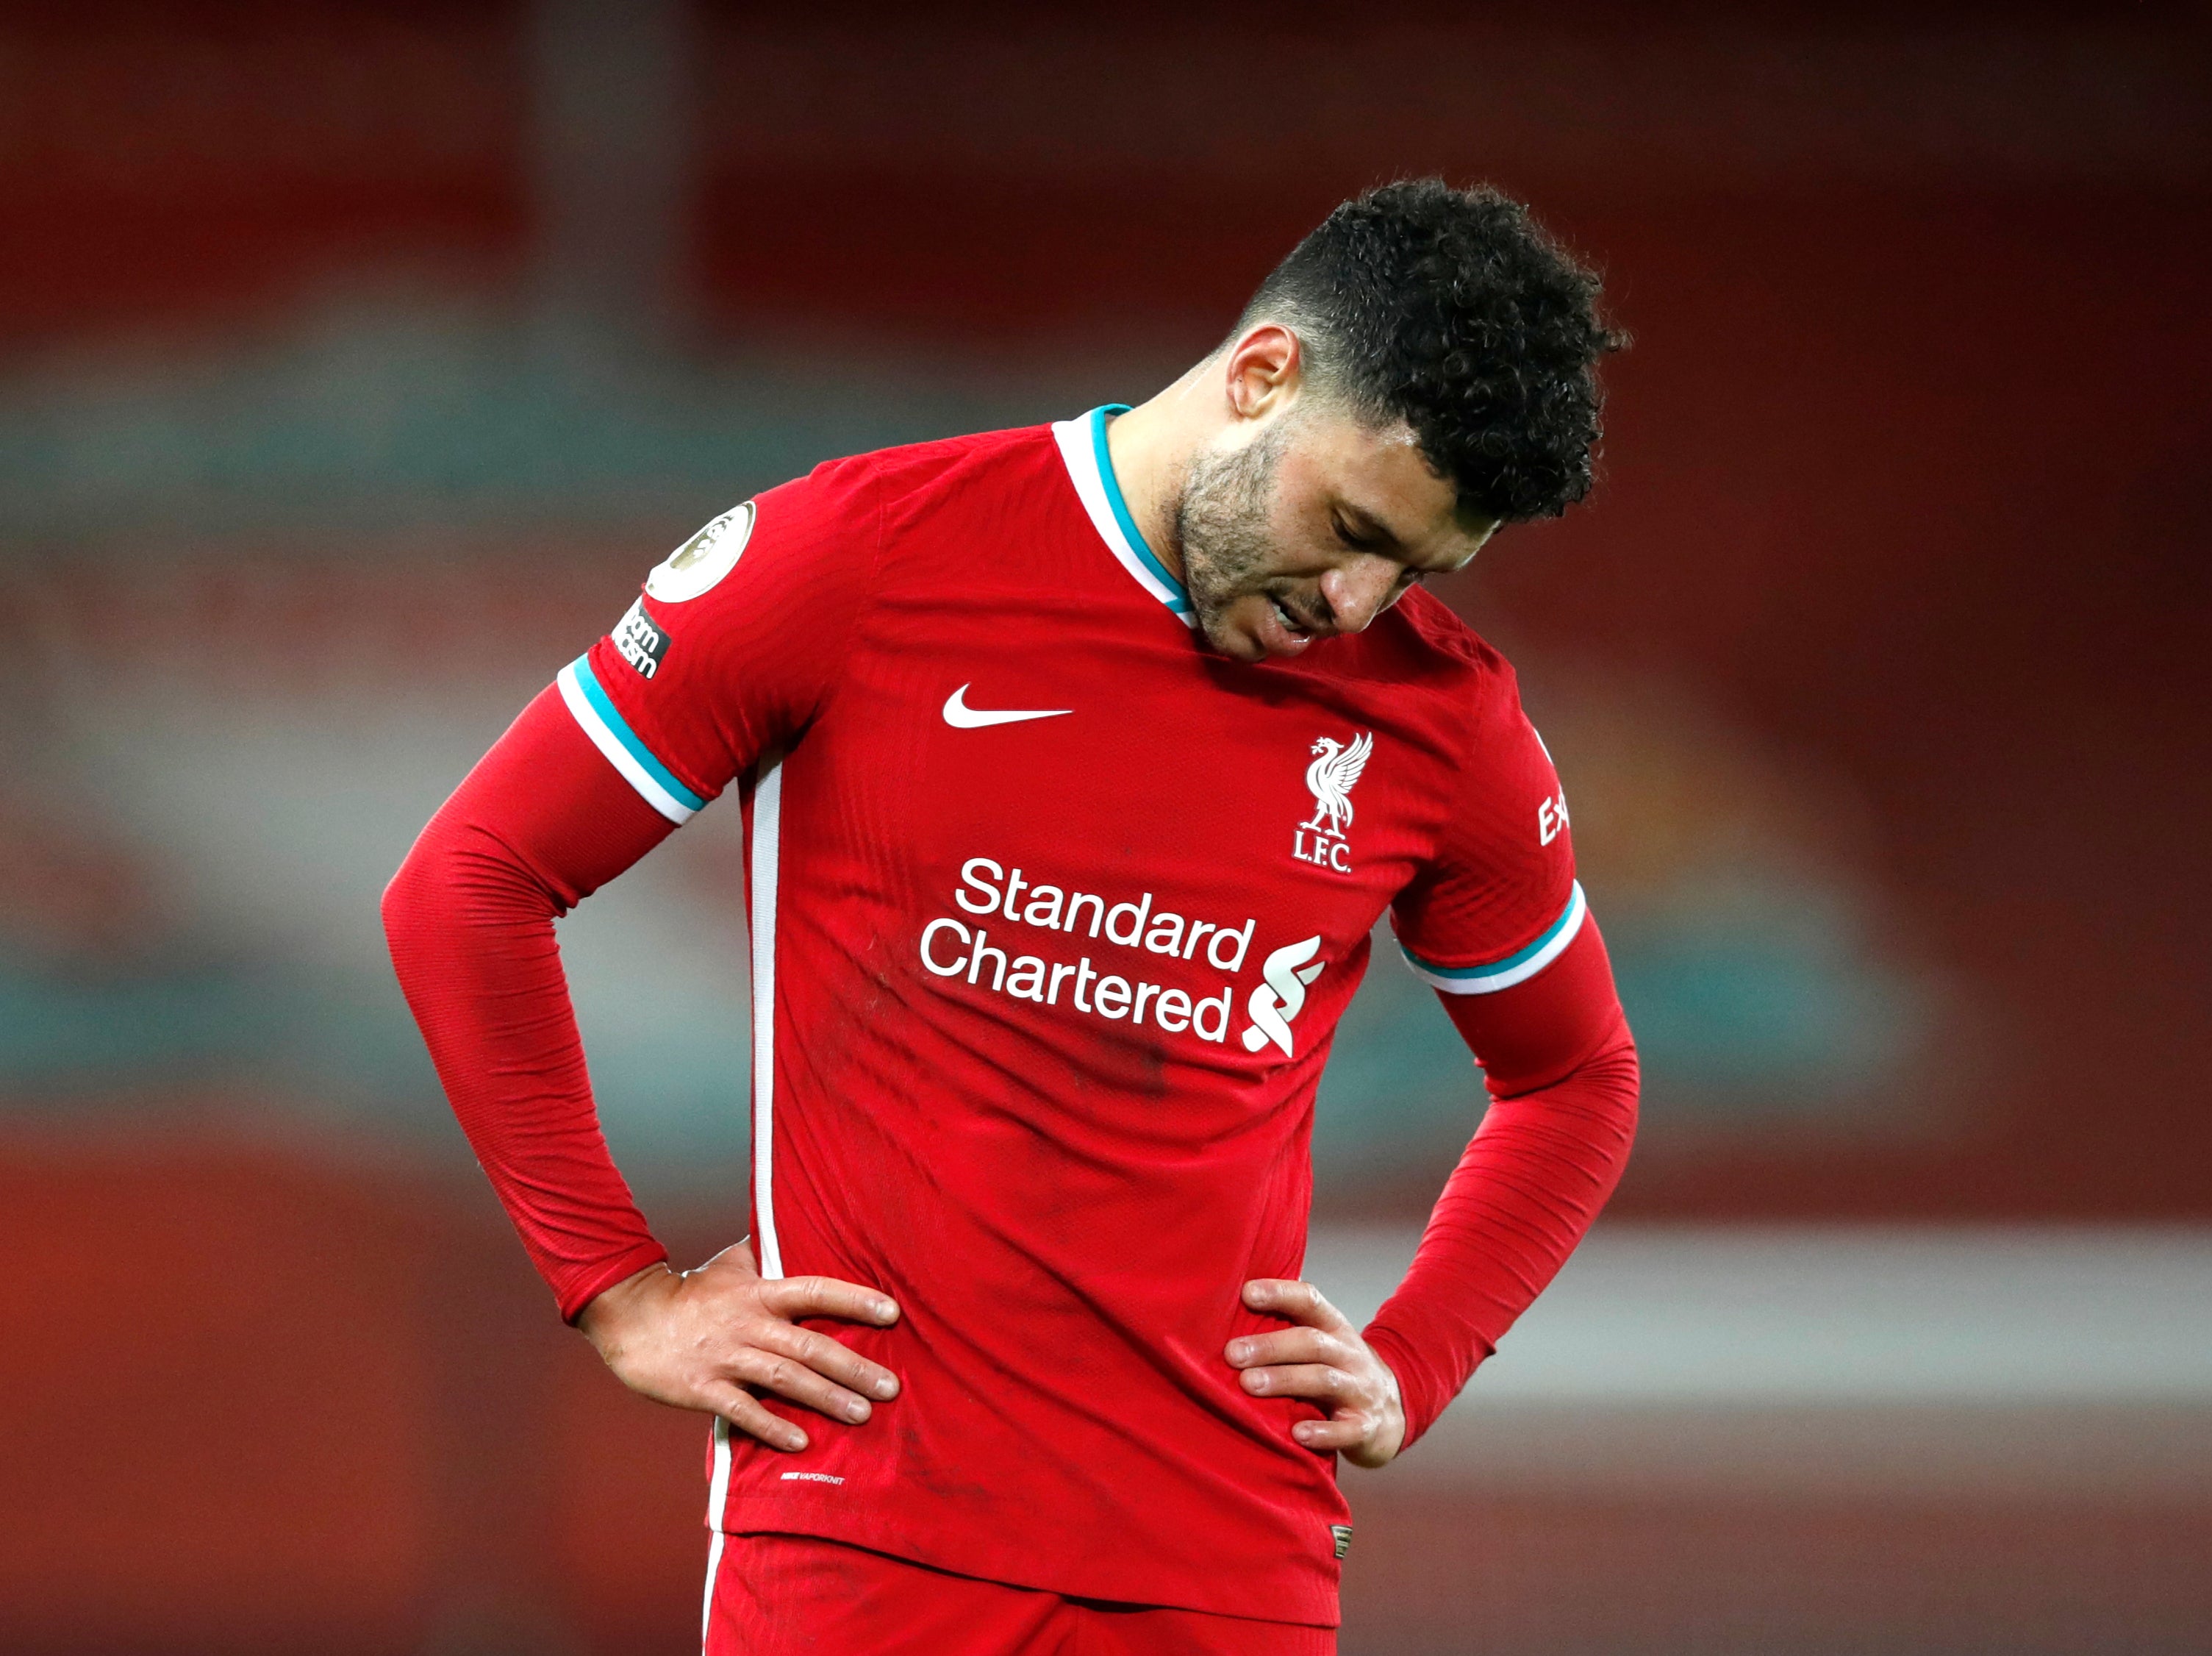 Alex Oxlade-Chamberlain has played a bit-part role for Liverpool this season